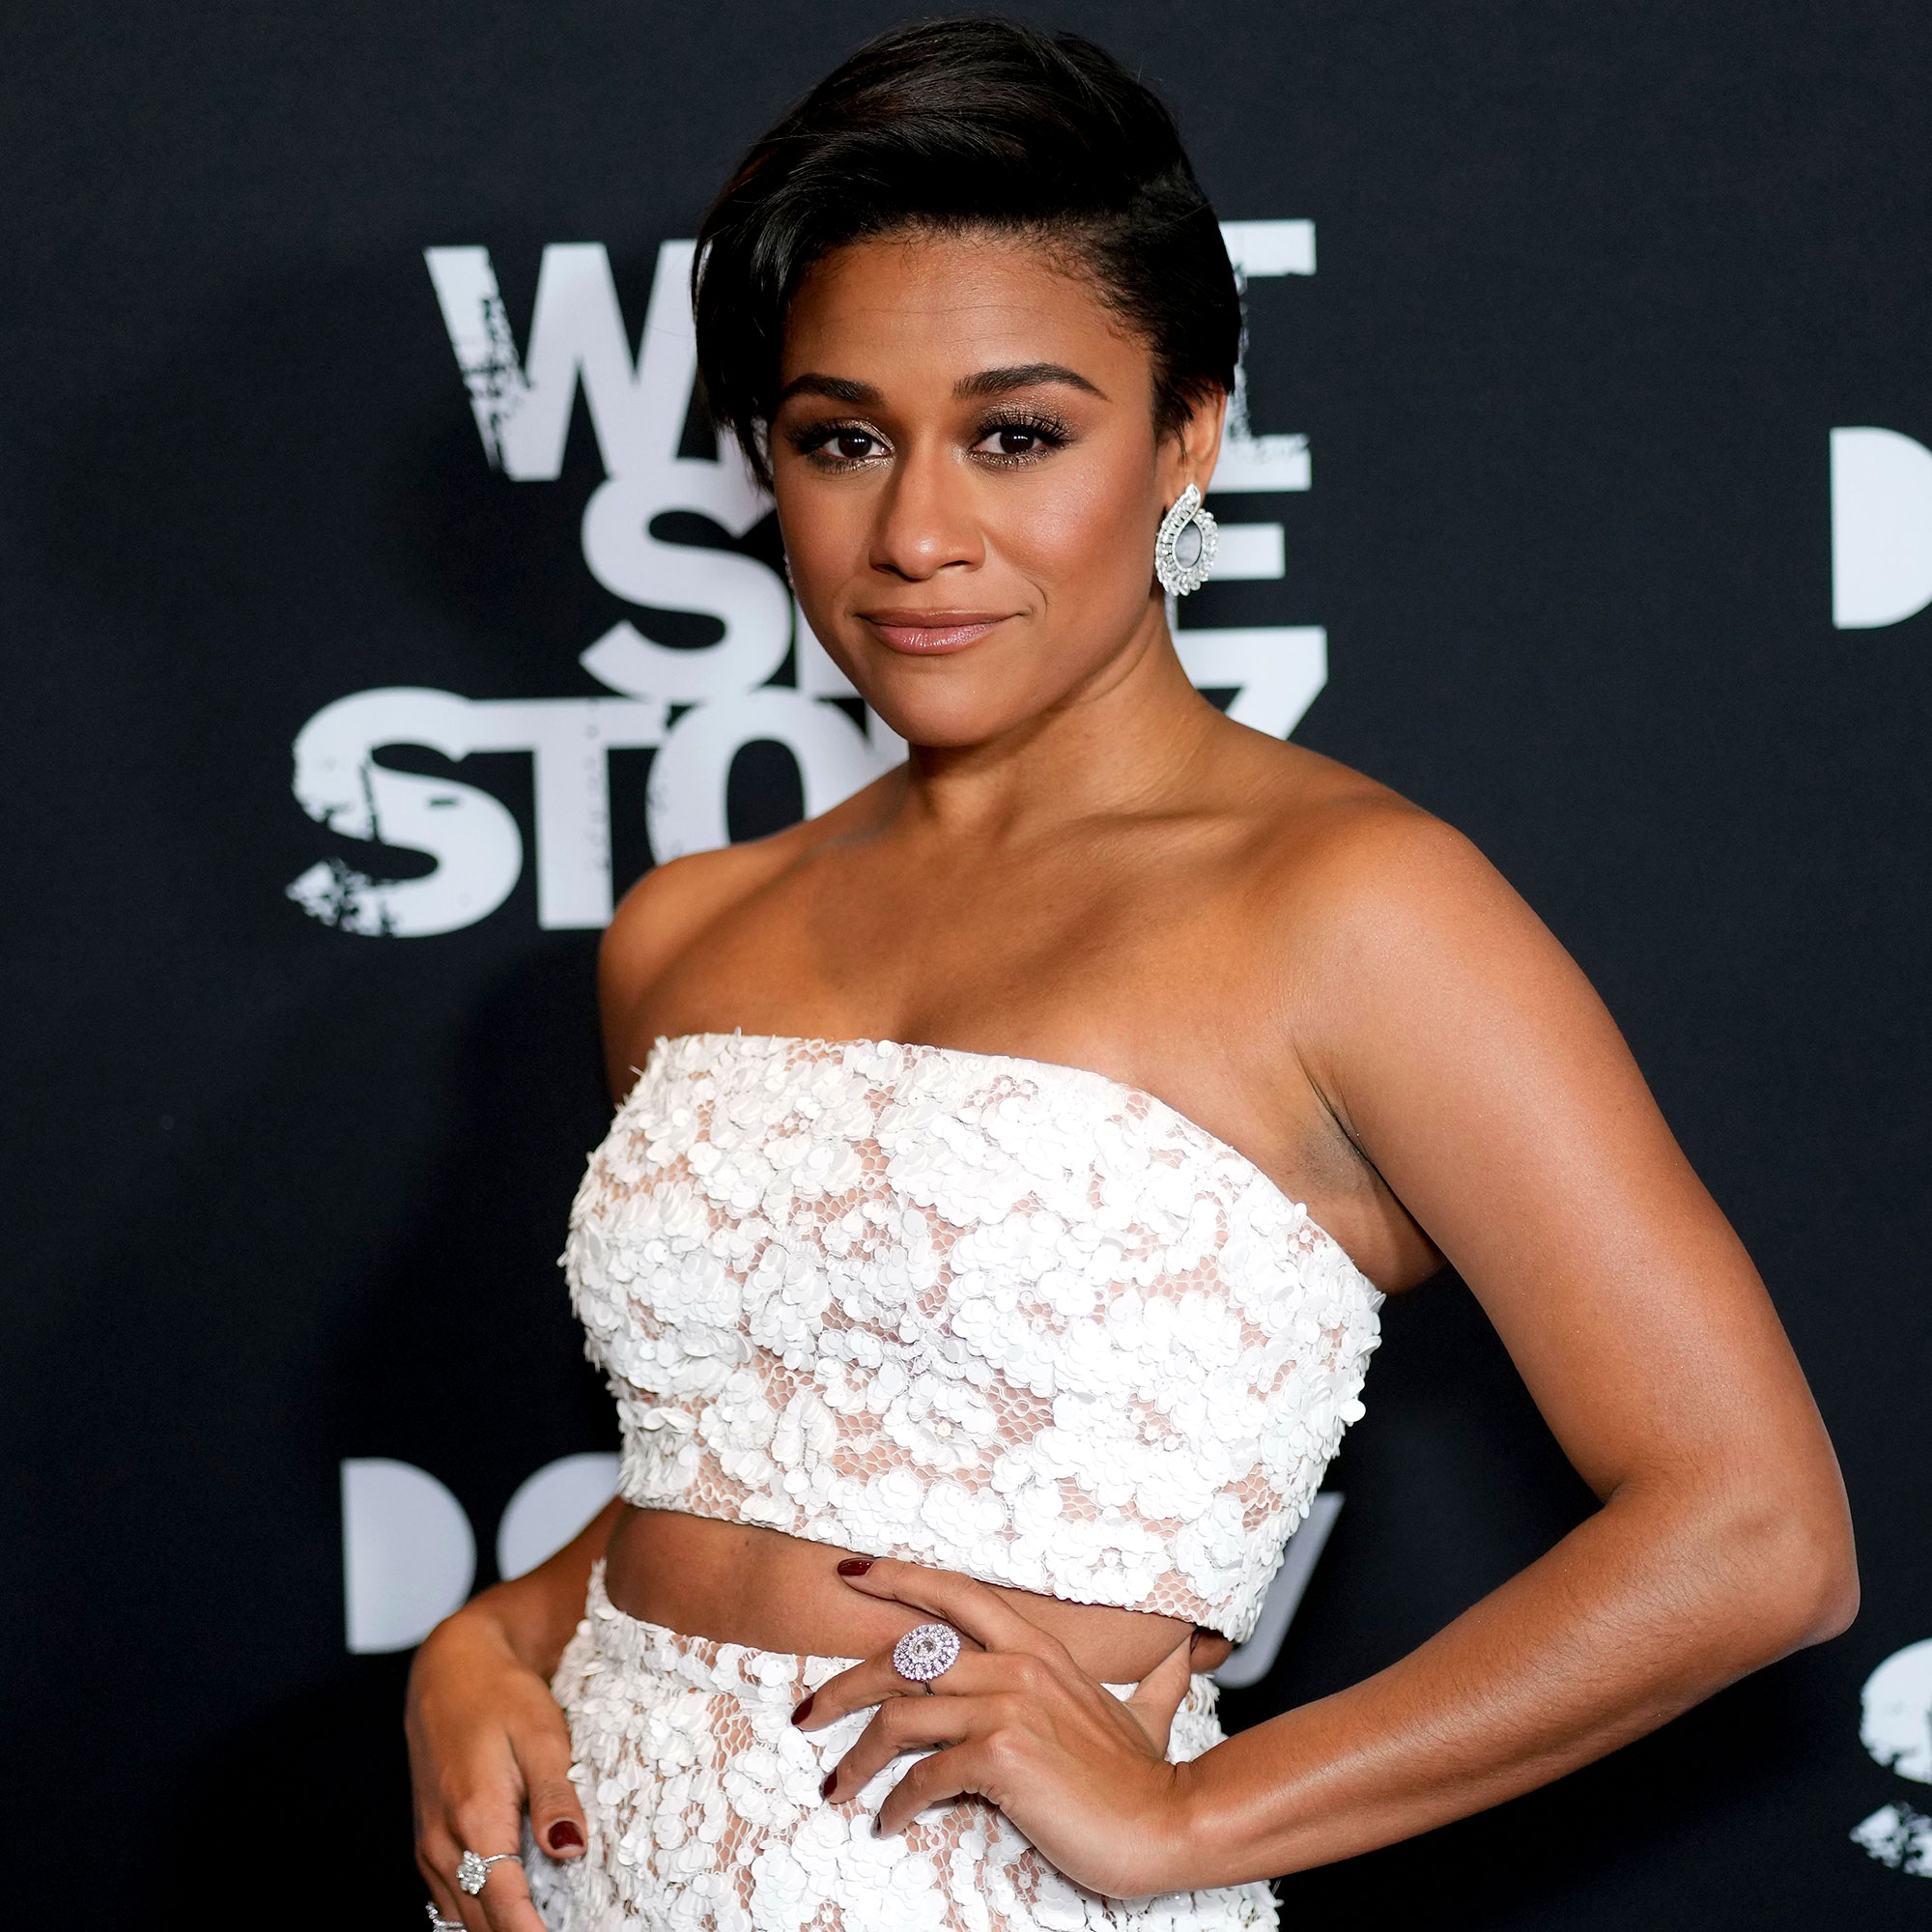 Ariana DeBose 5 Things to Know About West Side Story Actress